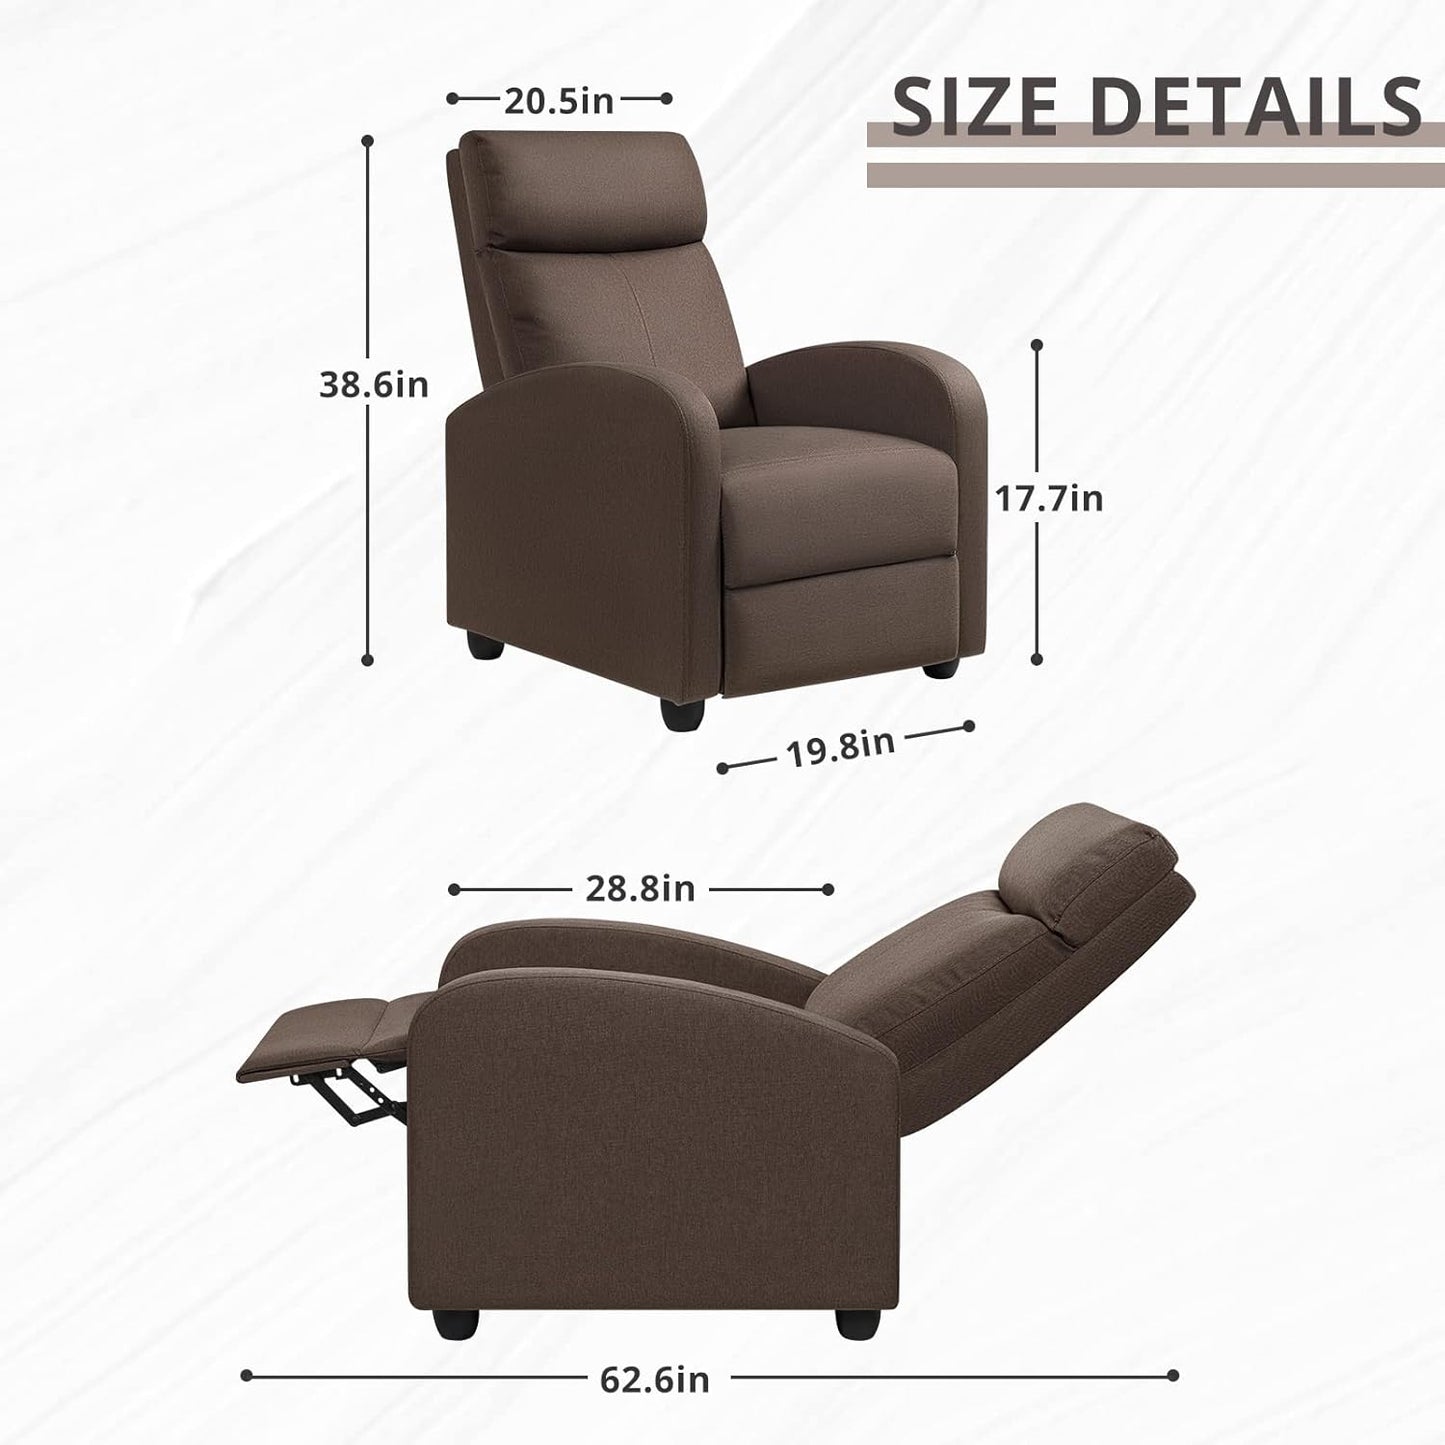 Recliner Chair Adjustable Home Theater Single Fabric Recliner Sofa Furniture with Thick Seat Cushion and Backrest Modern Living Room Recliners (Brown)